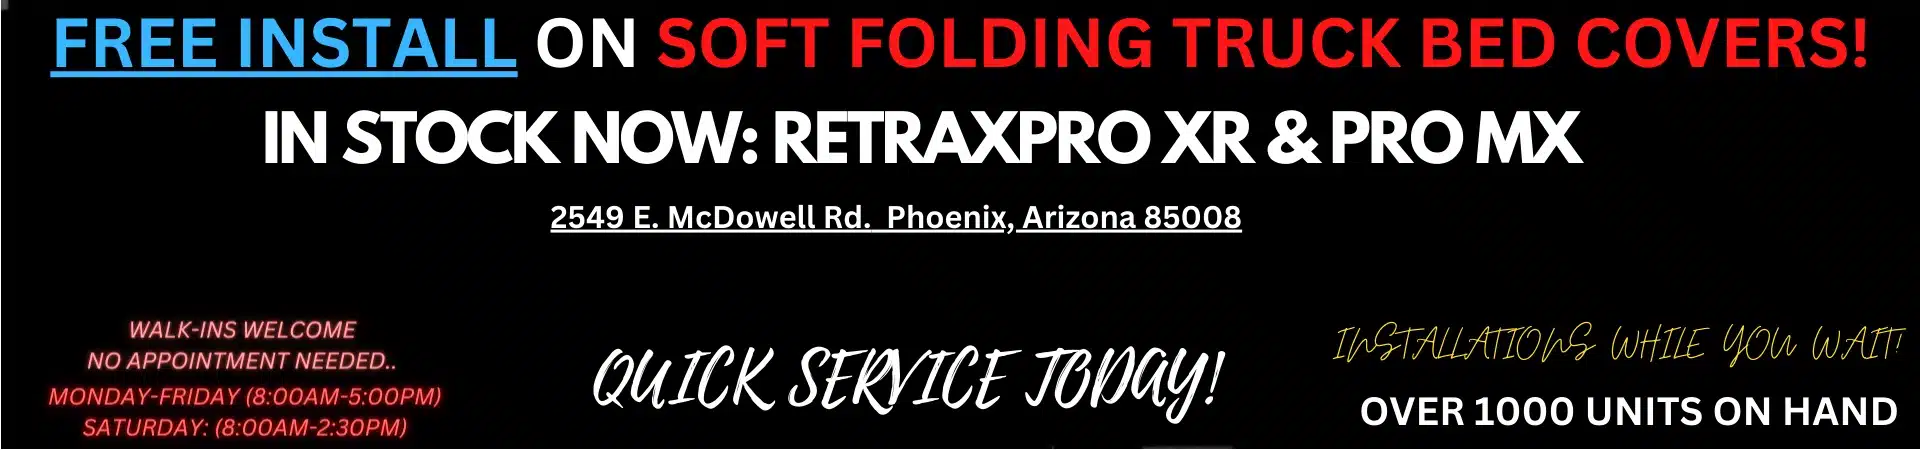 free install on soft folding truck bed covers